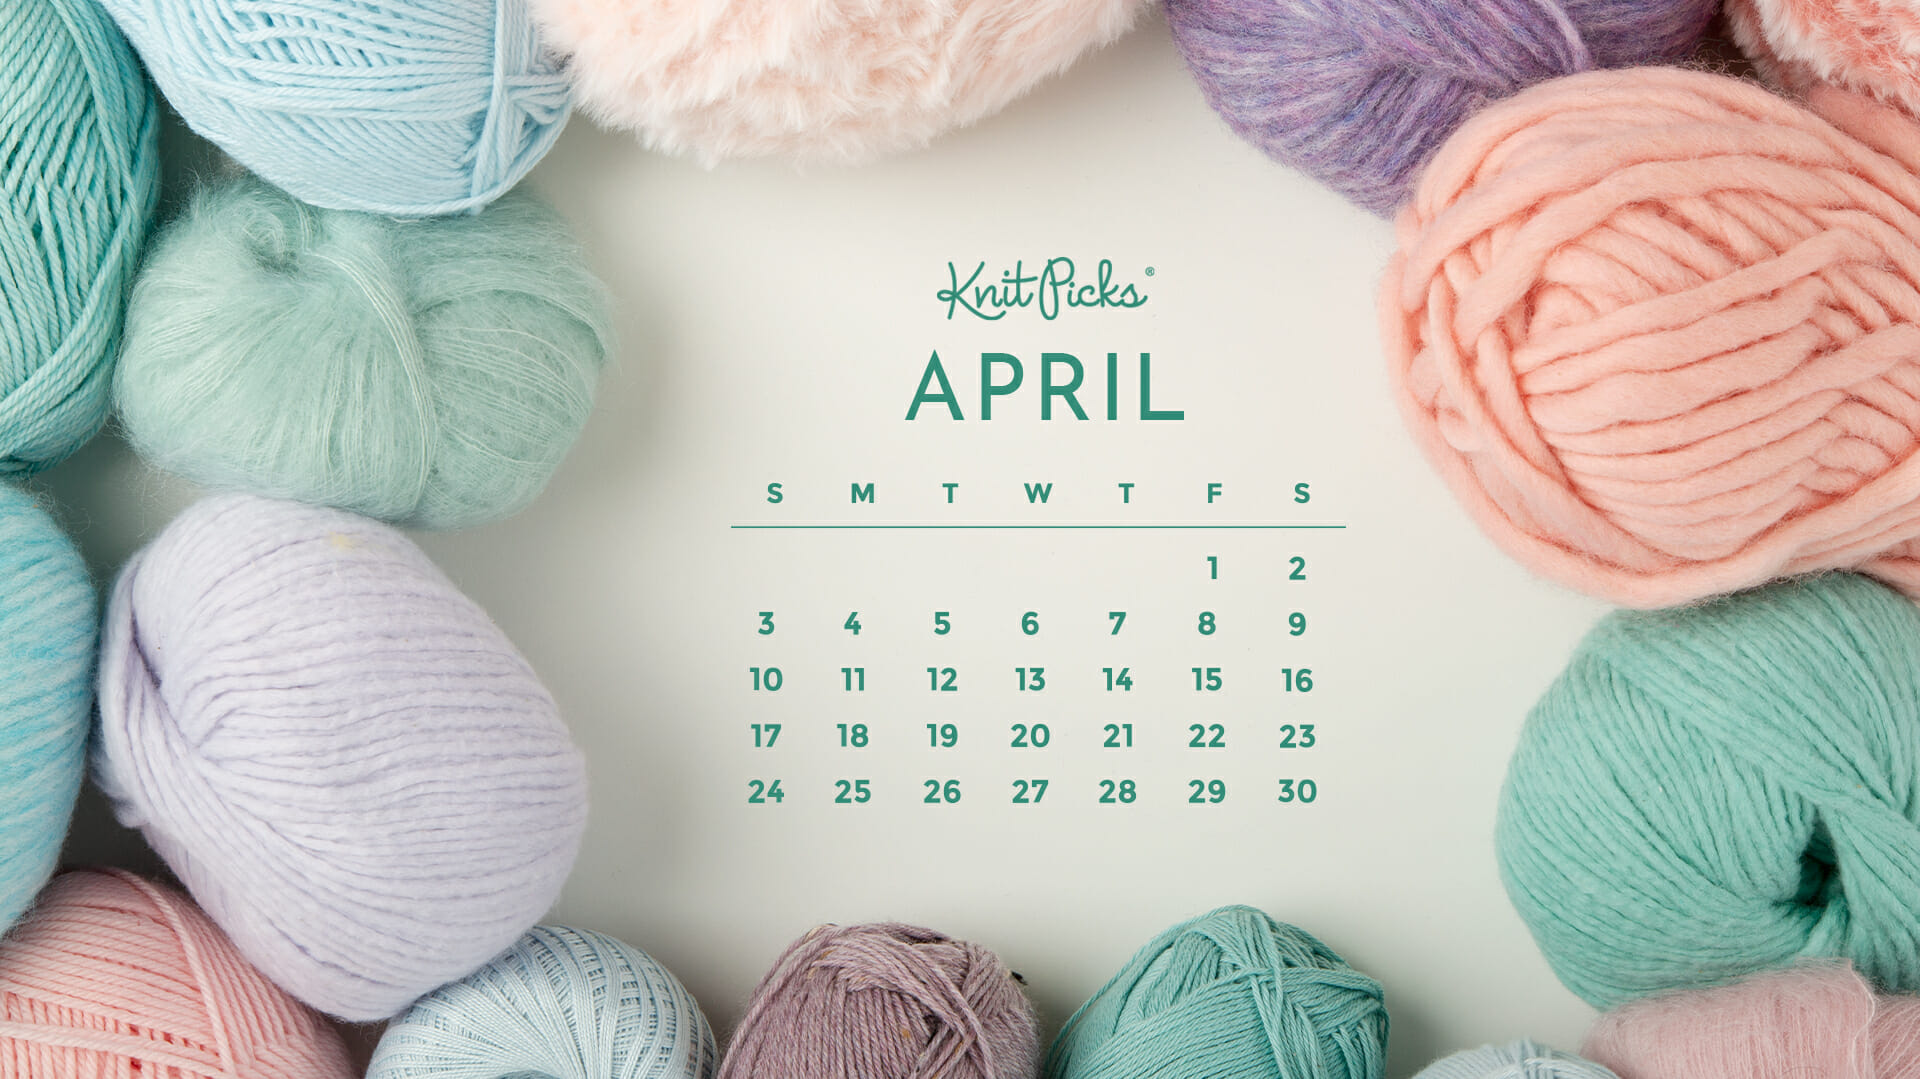 Pastel crochet and knitting pattern background images